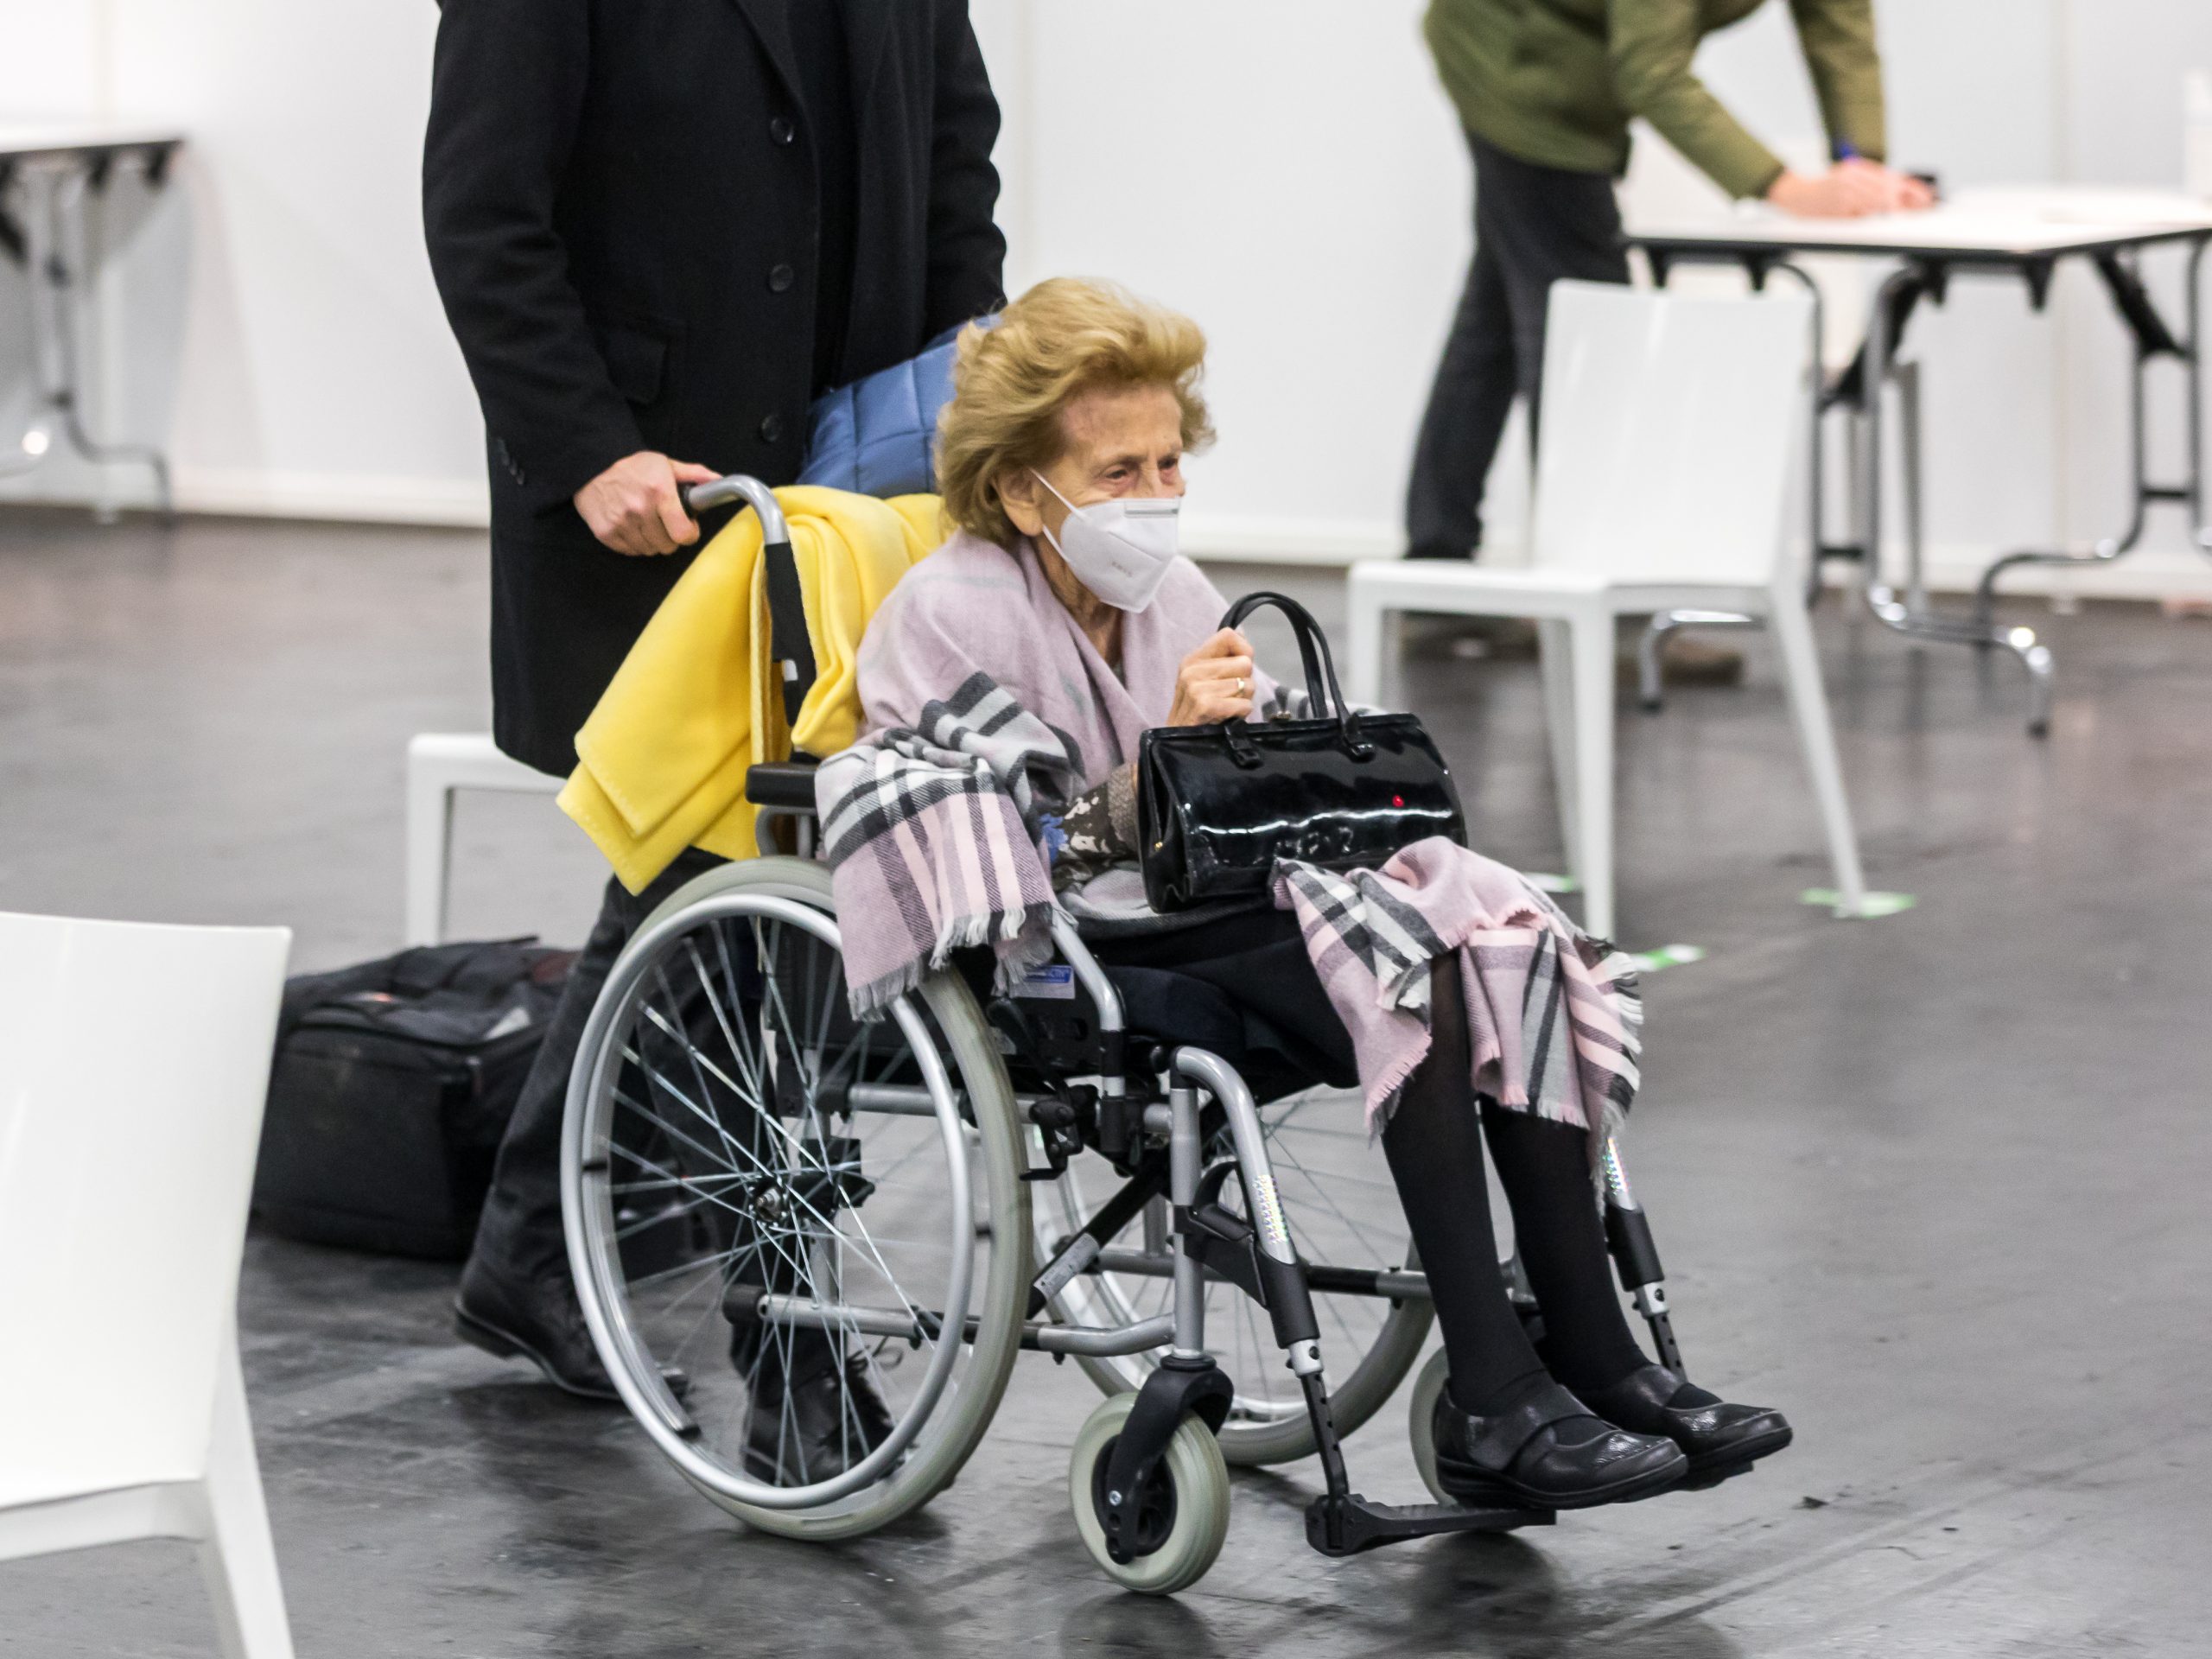 Photo showing an elderly woman, wearing a mask being pushed in a wheelchair